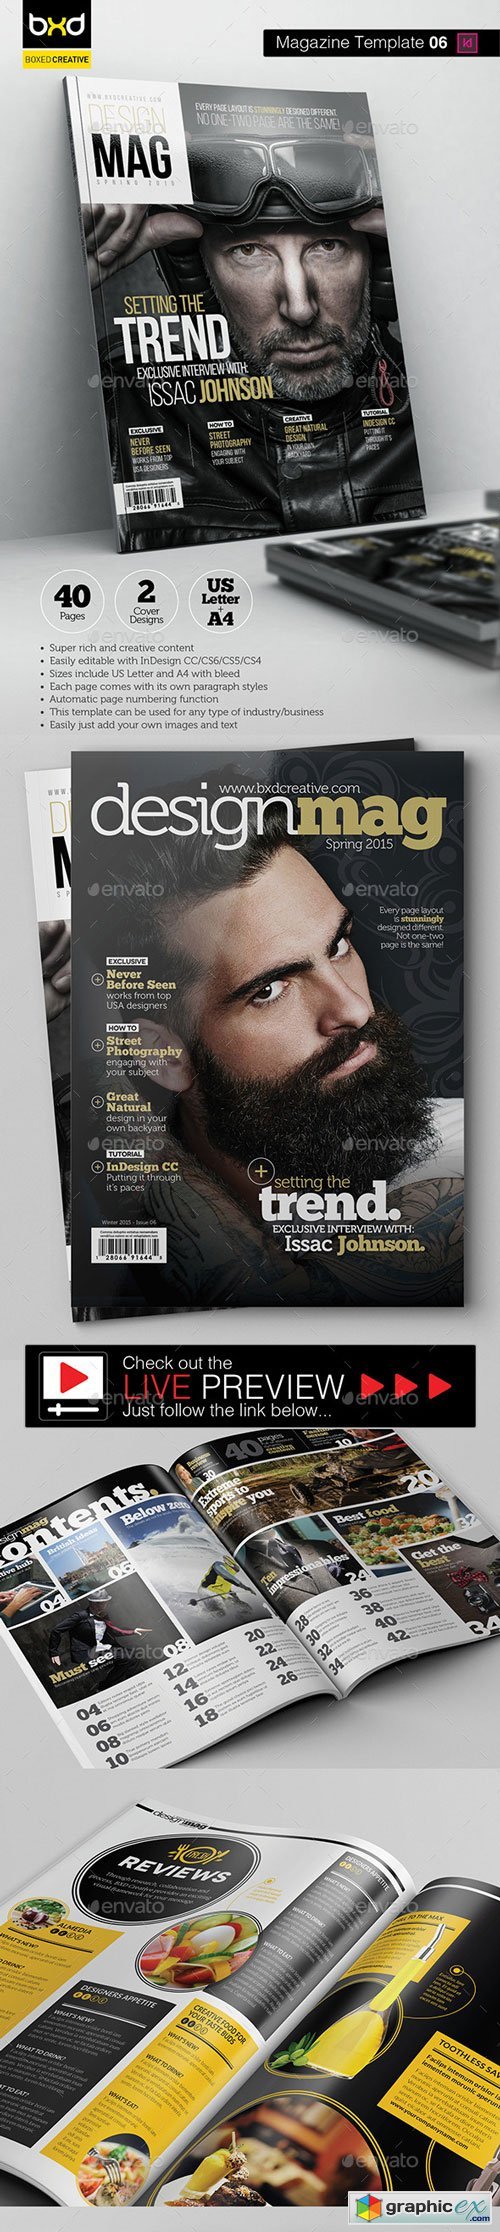 Magazine Template - InDesign 40 Page Layout V6